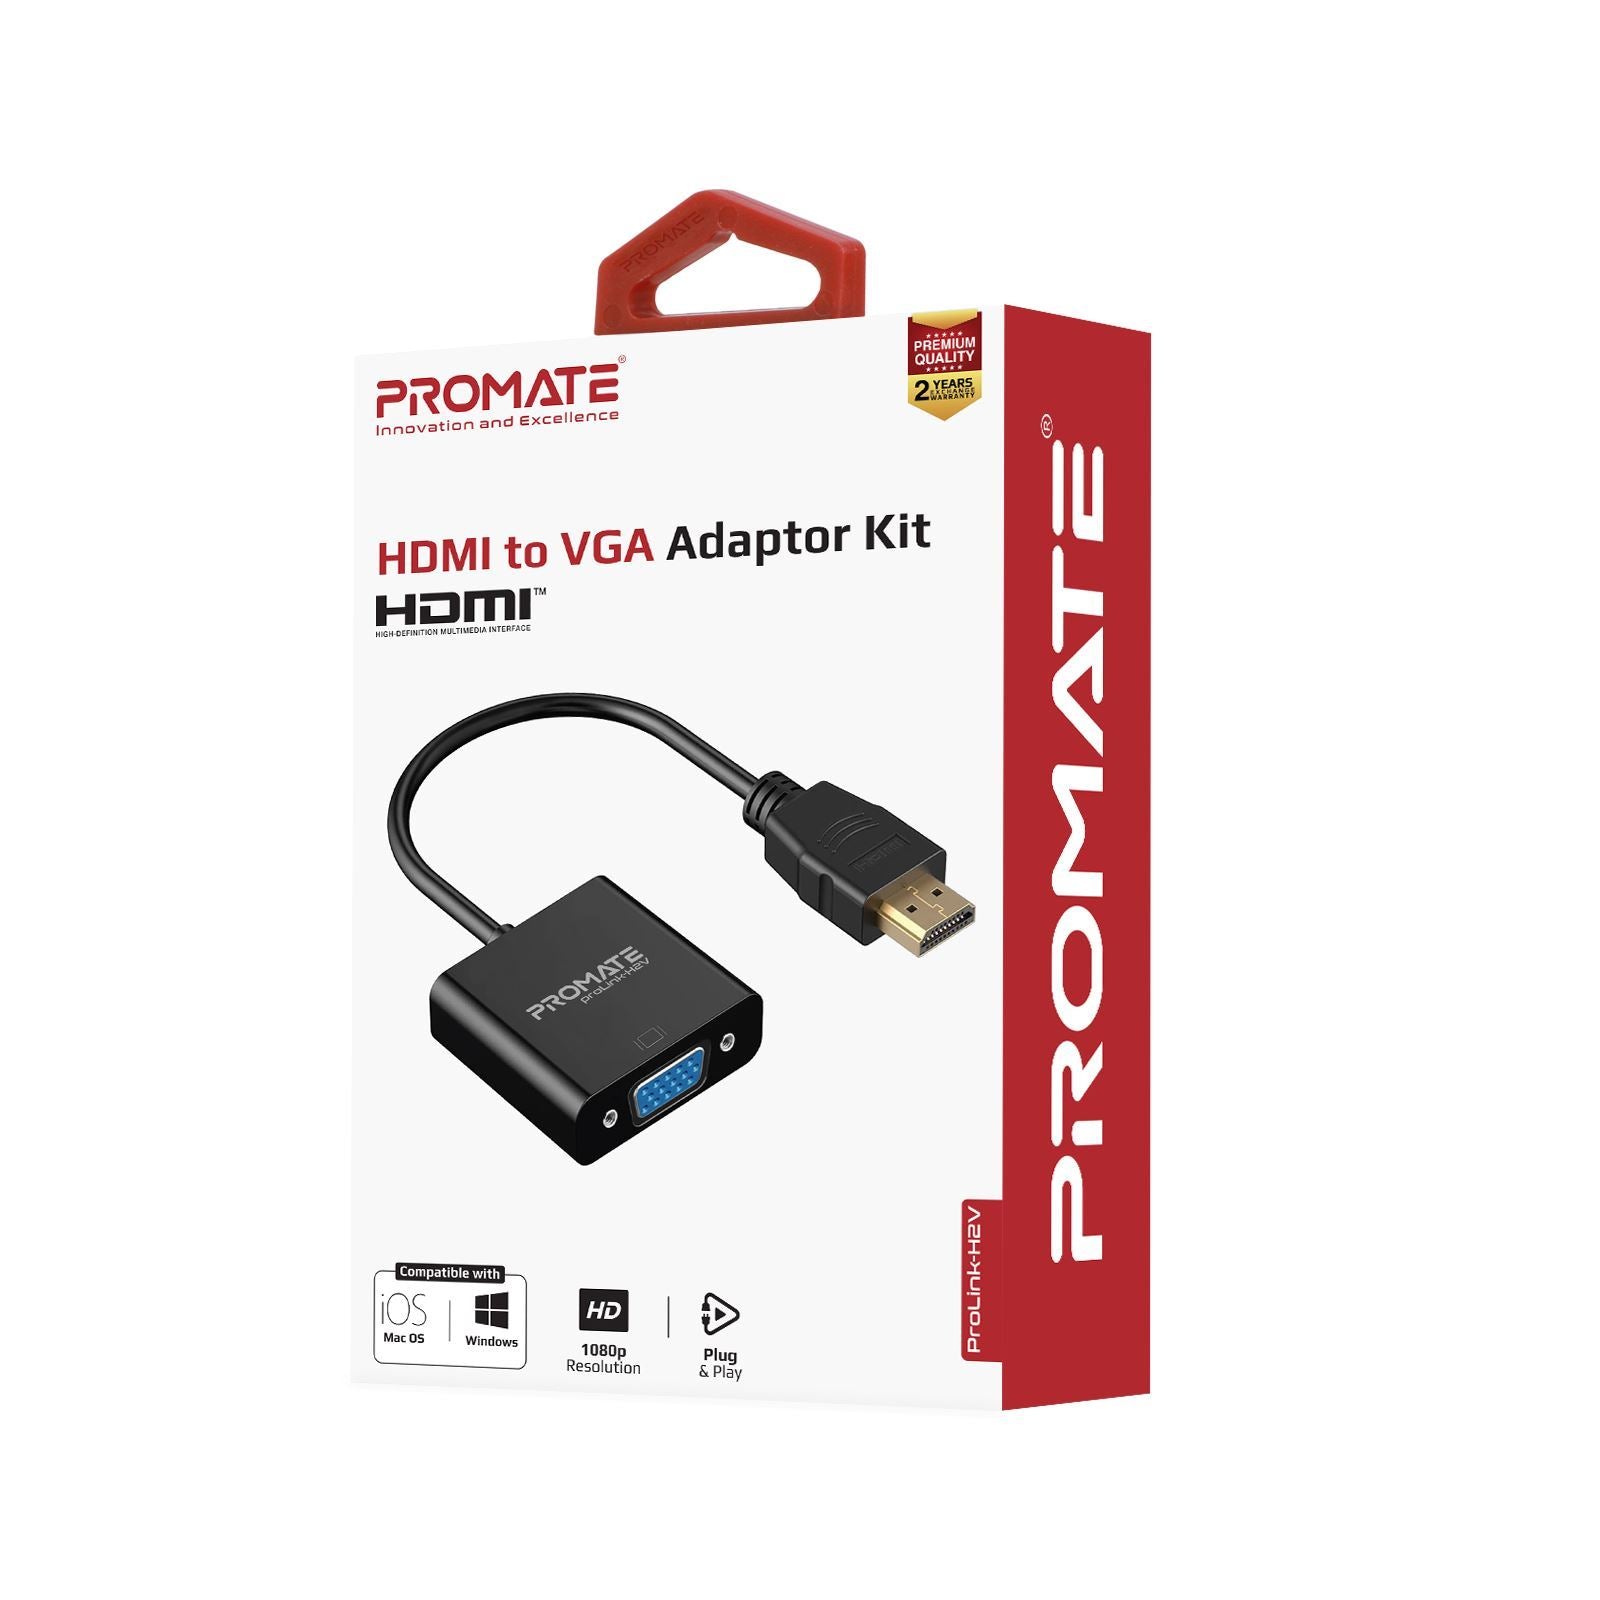 PROMATE_HDMI_(Male)_to_VGA_(Female)_Display_Adaptor_Kit._Supports_up_to_1920x1080@60Hz._Gold-Plated_HDMI_Connector._Supports_both_Windows_&_Mac._Black_Colour. 1717